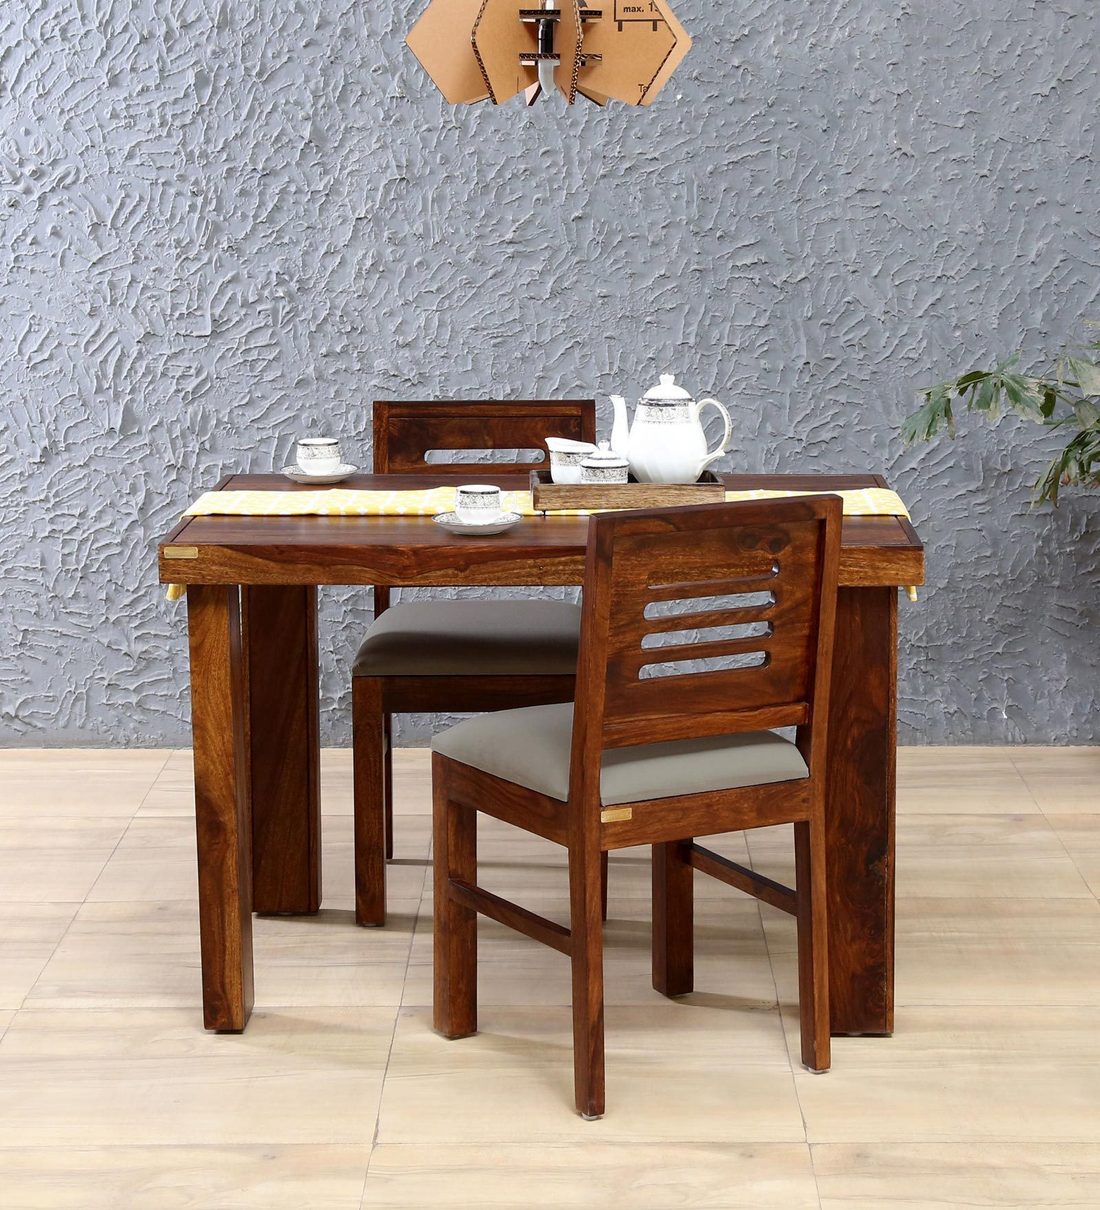 Acro Solid Wood Cushioned 2 Seater Dining Set For Dining Room - Rajwada Furnish